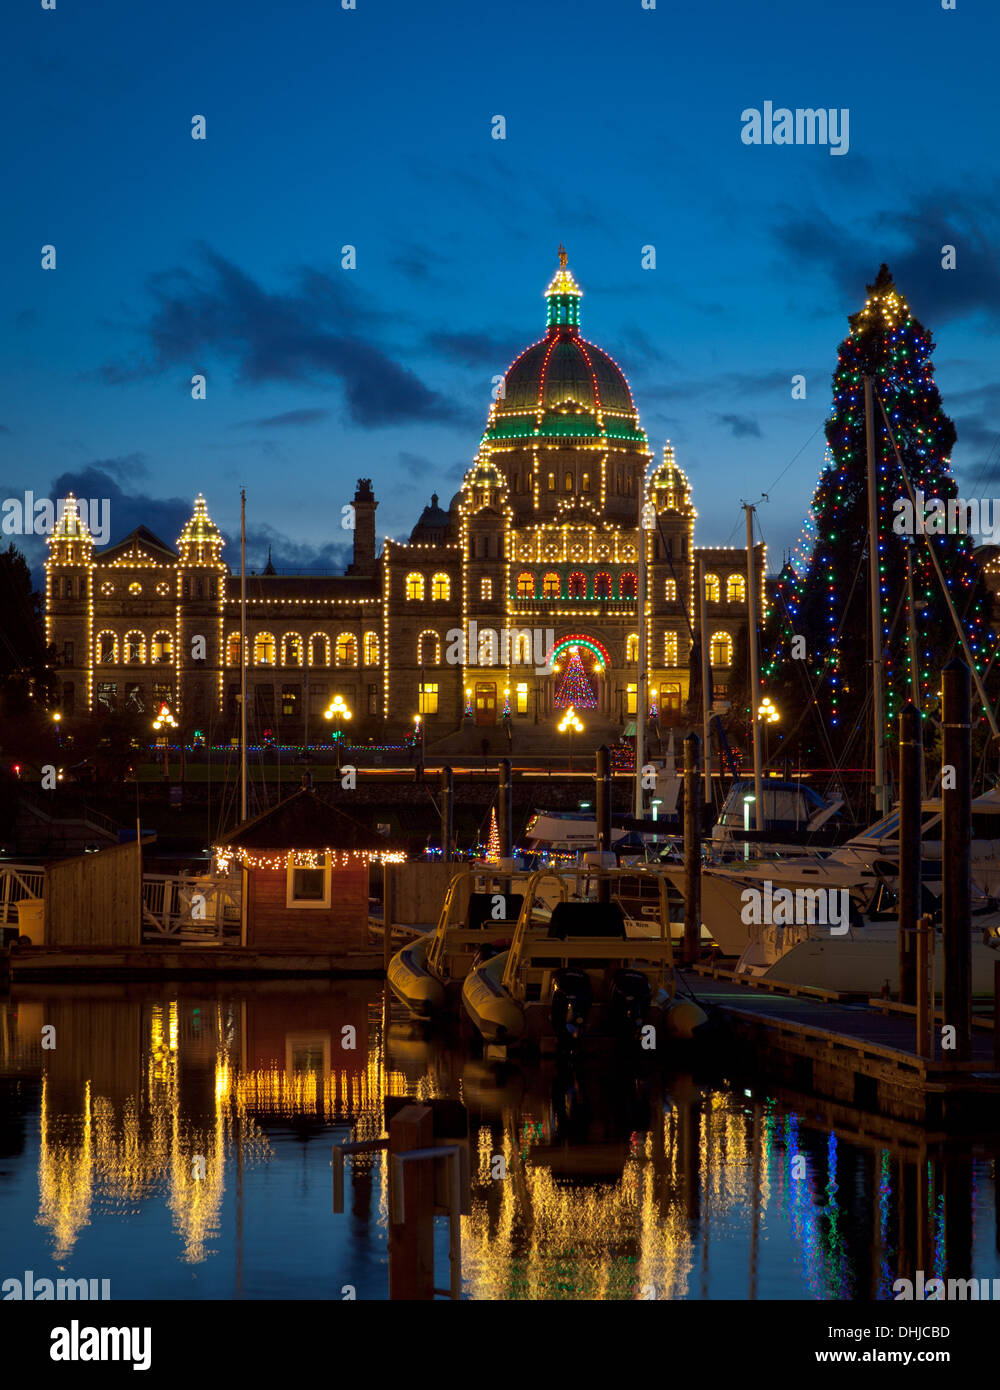 A view of the British Columbia Parliament Building and the Inner Harbour in Victoria, British Columbia, Canada at Christmas. Stock Photo